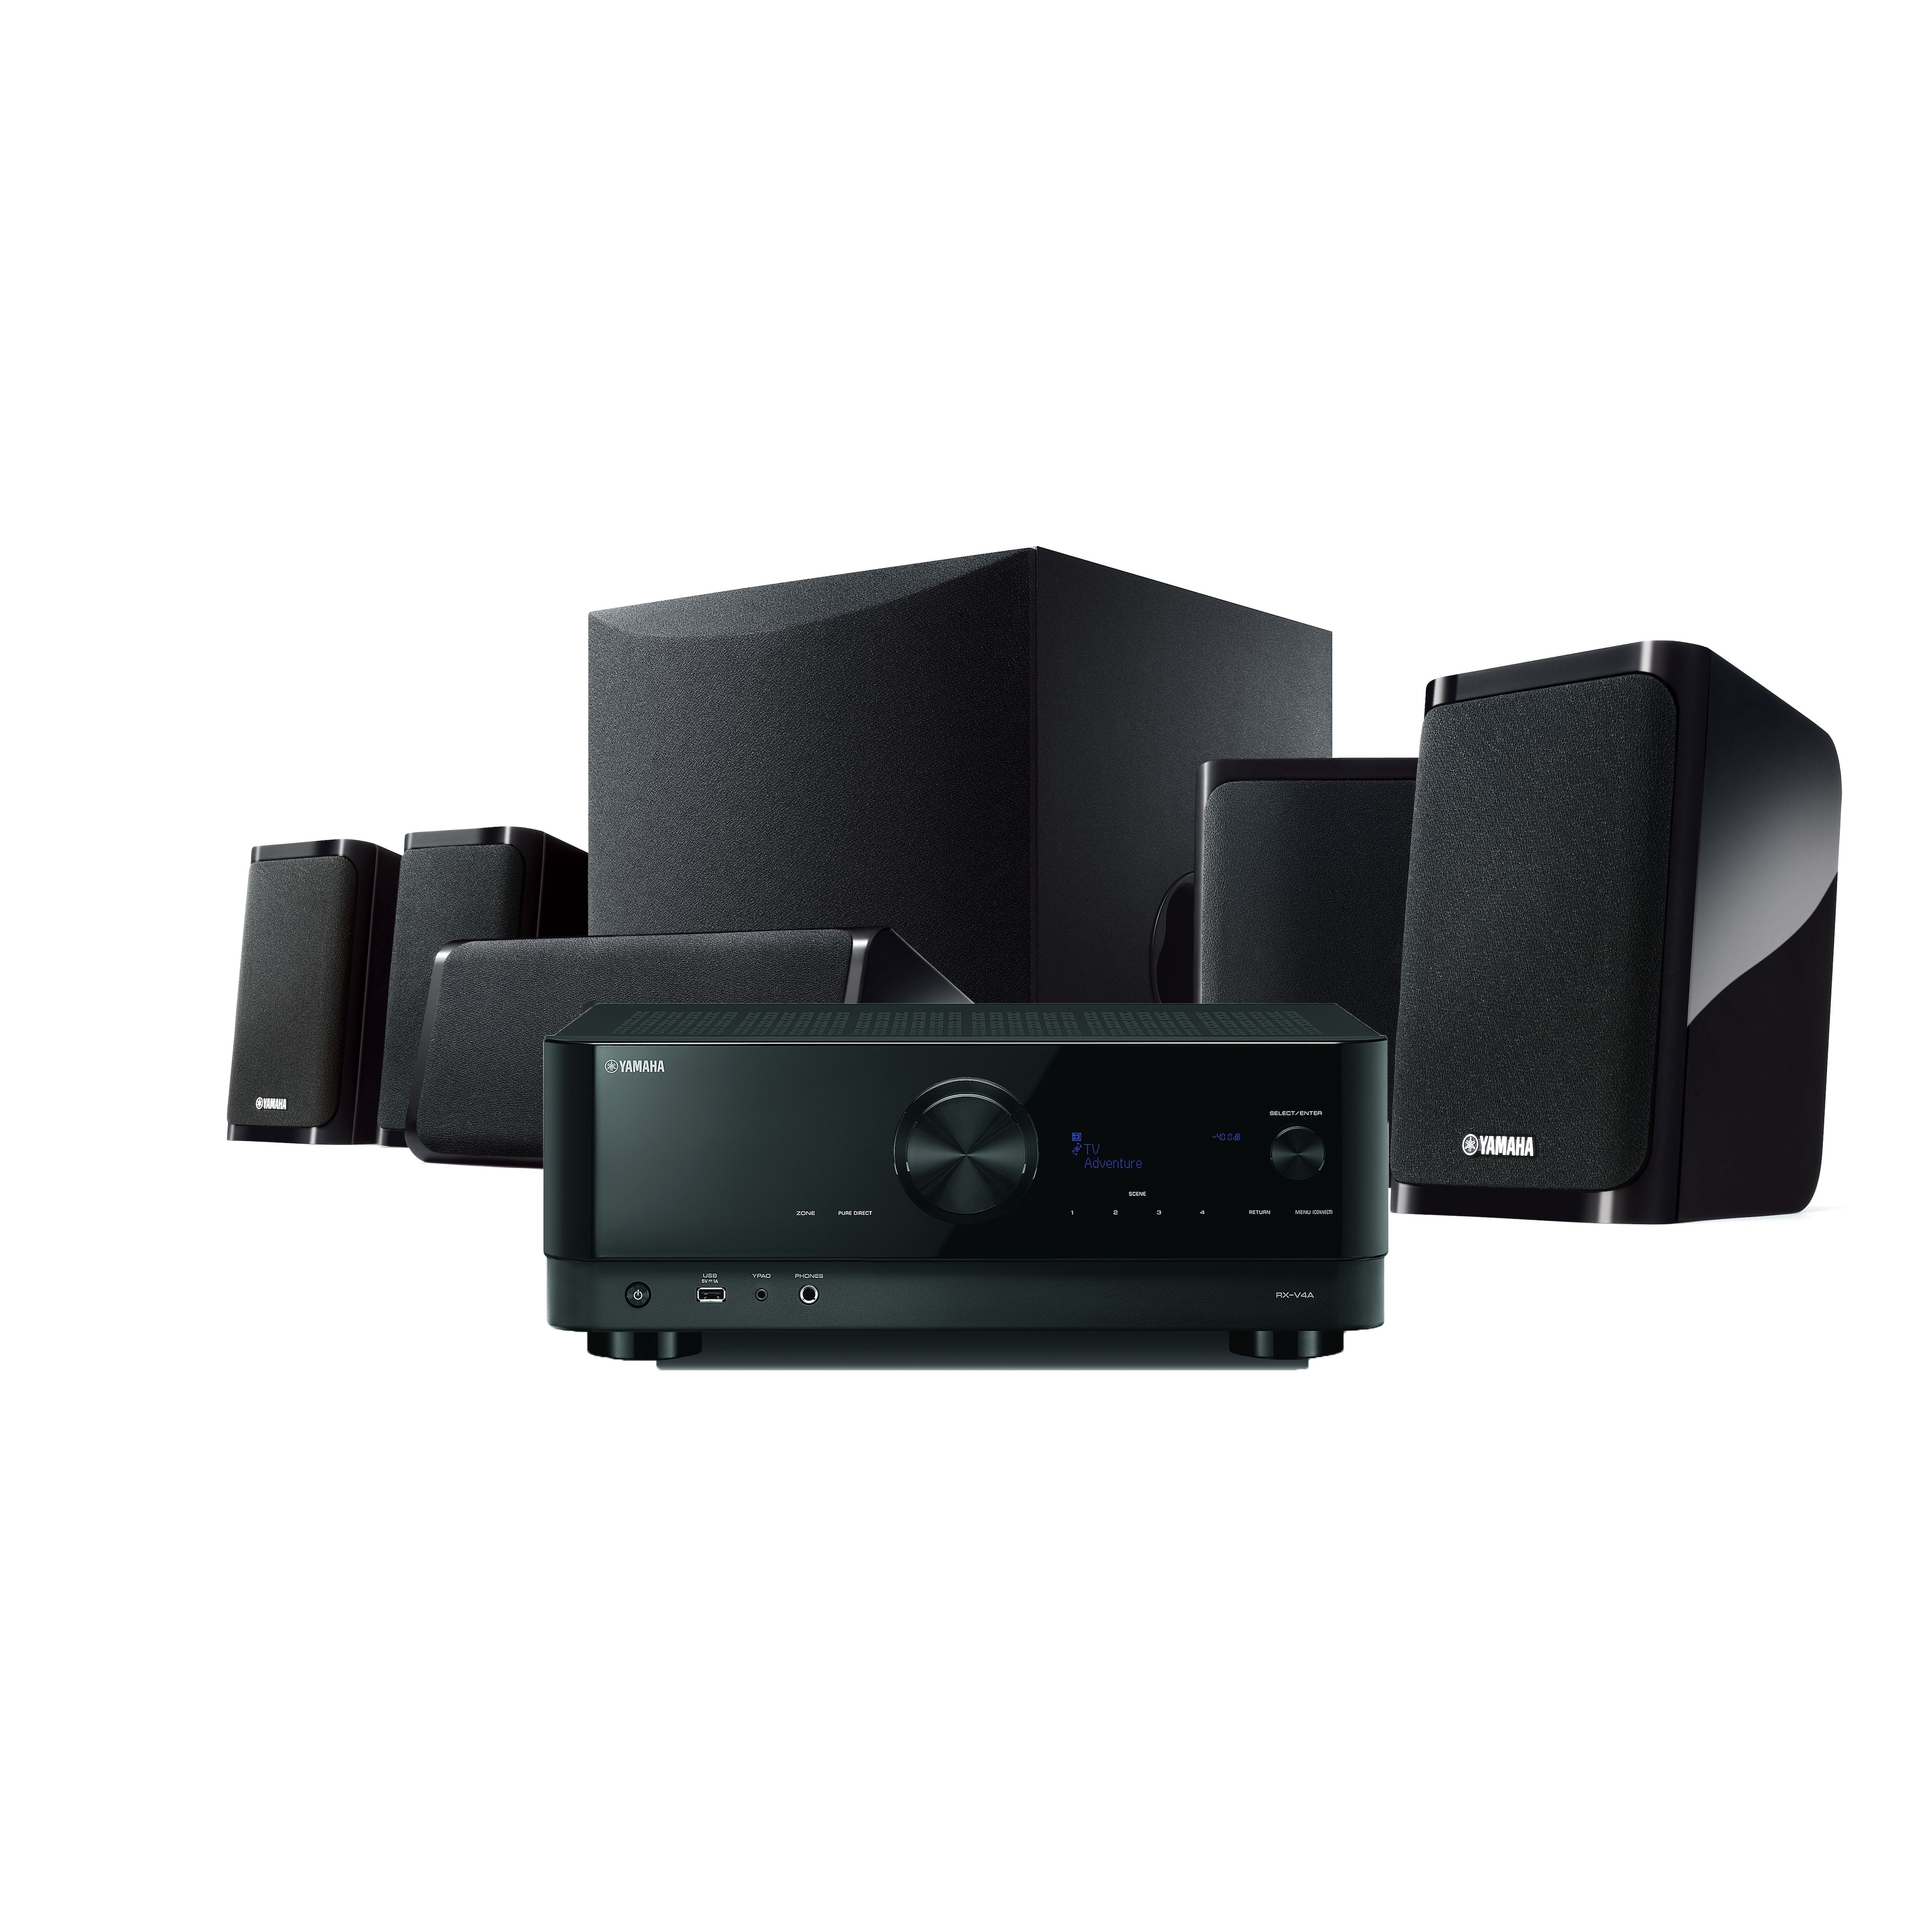 Home Theater Systems - Audio & Visual - Products - Yamaha USA